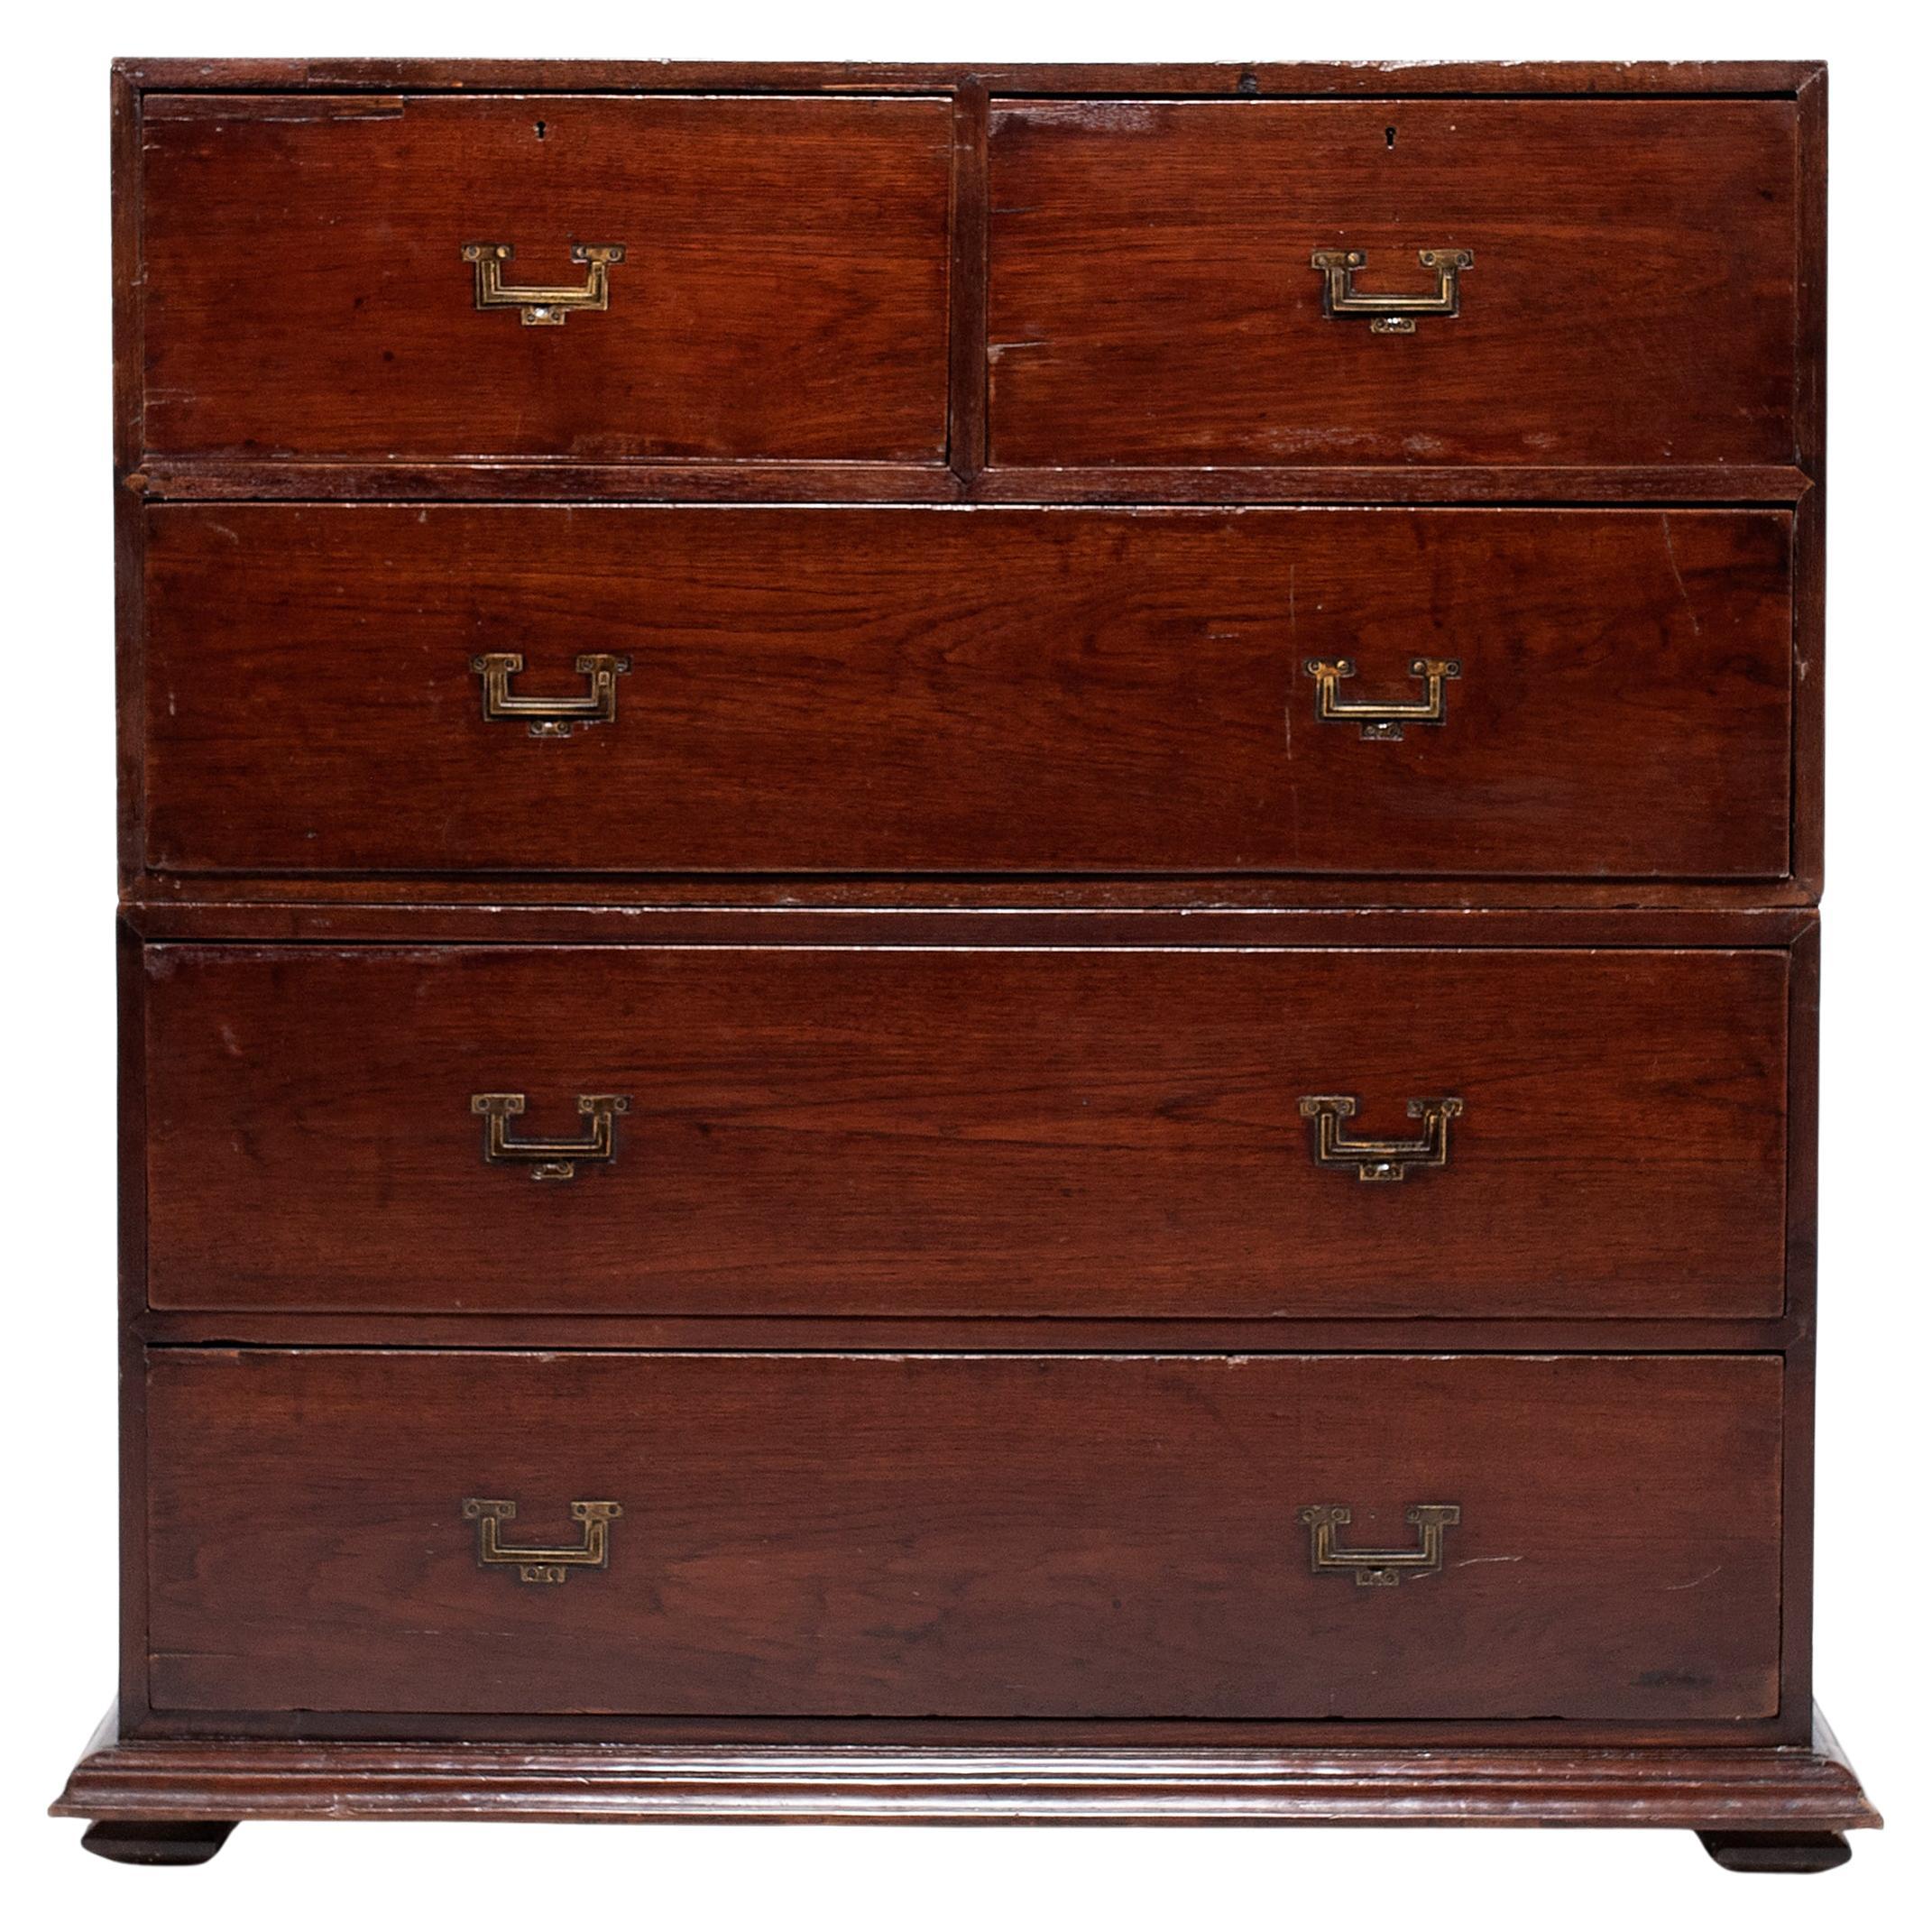 English Campaign Style Mahogany Stacking Chest of Drawers, c. 1900